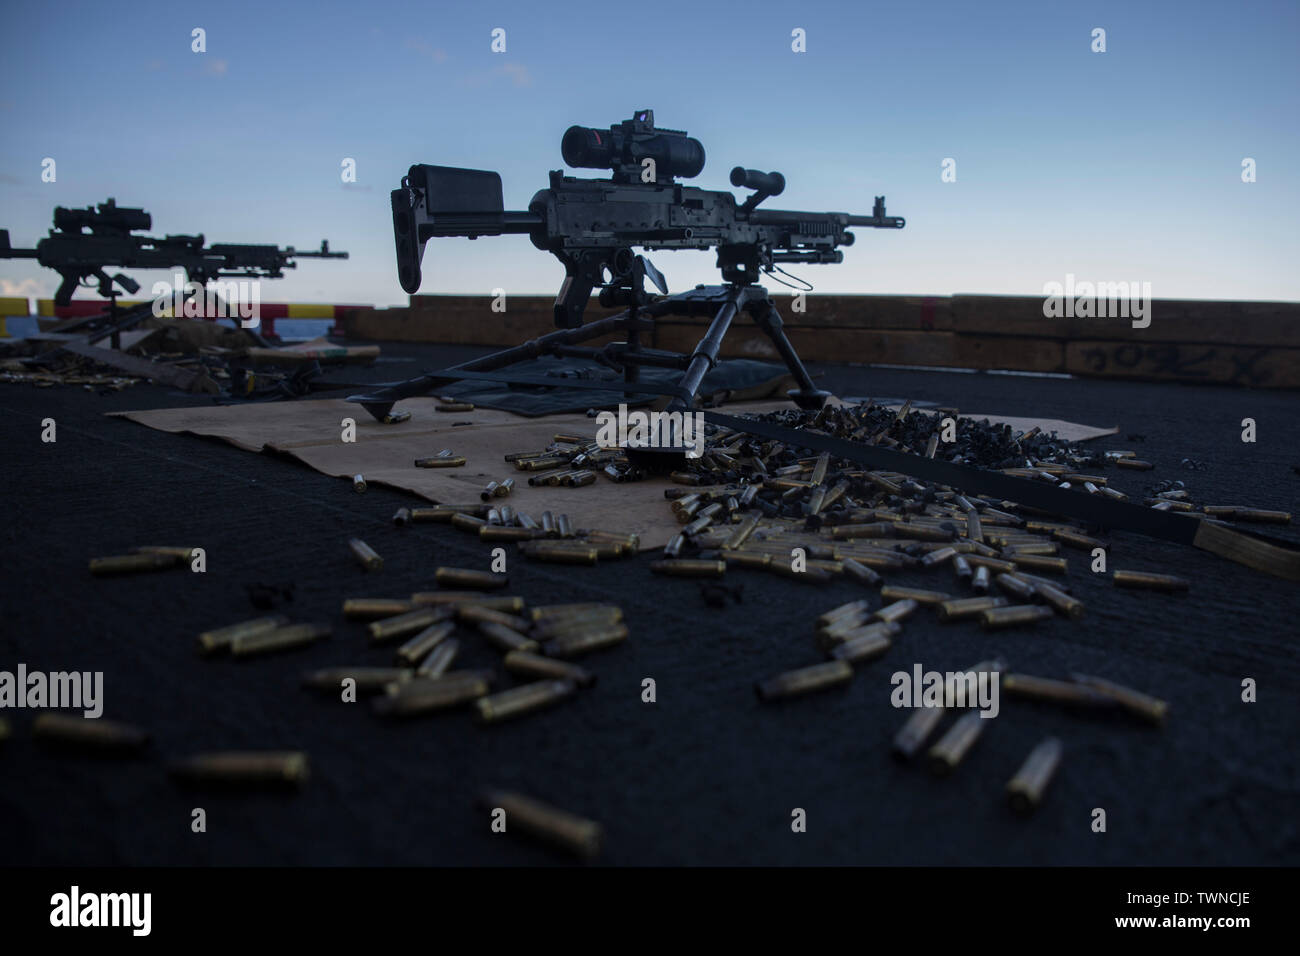 M240B medium machine guns stand by aboard the amphibious assault ship USS Wasp (LHD 1), underway in the Coral Sea, June 15, 2019. The 31st Marine Expeditionary Unit, the Marine Corps` only continuously forward-deployed MEU, provides a flexible and lethal force ready to perform a wide range of military operations as the premier crisis response force in the Indo-Pacific region. (Official U.S. Marine Corps photo by Lance Cpl. Kenny Nunez Bigay) Stock Photo